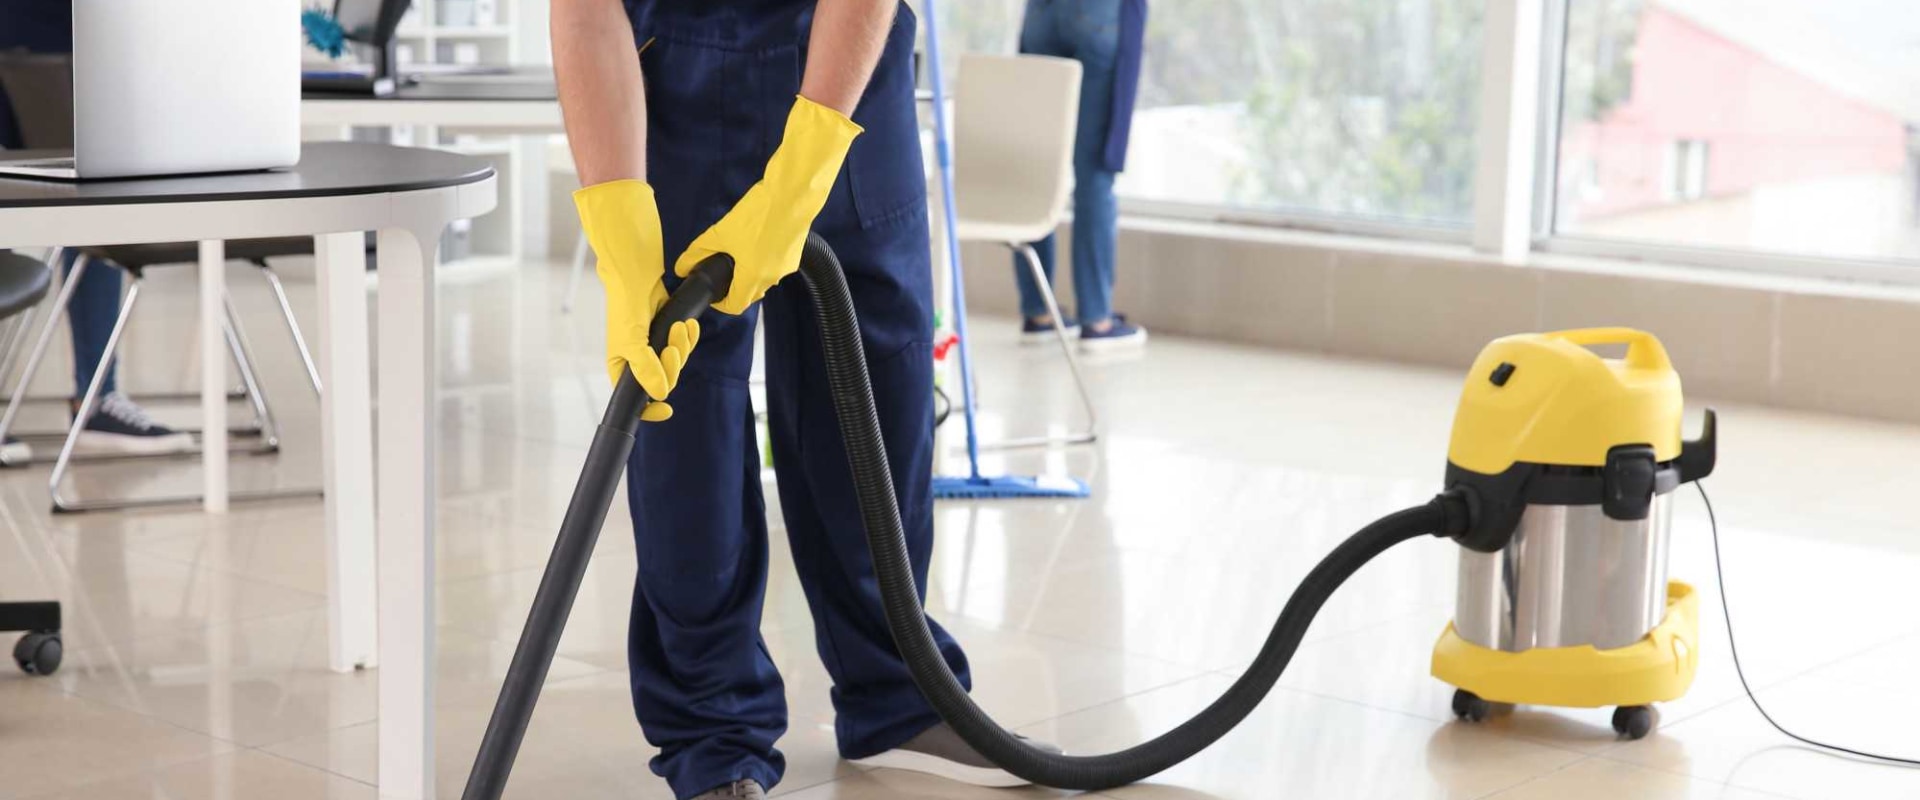 Commercial cleaning regulations?